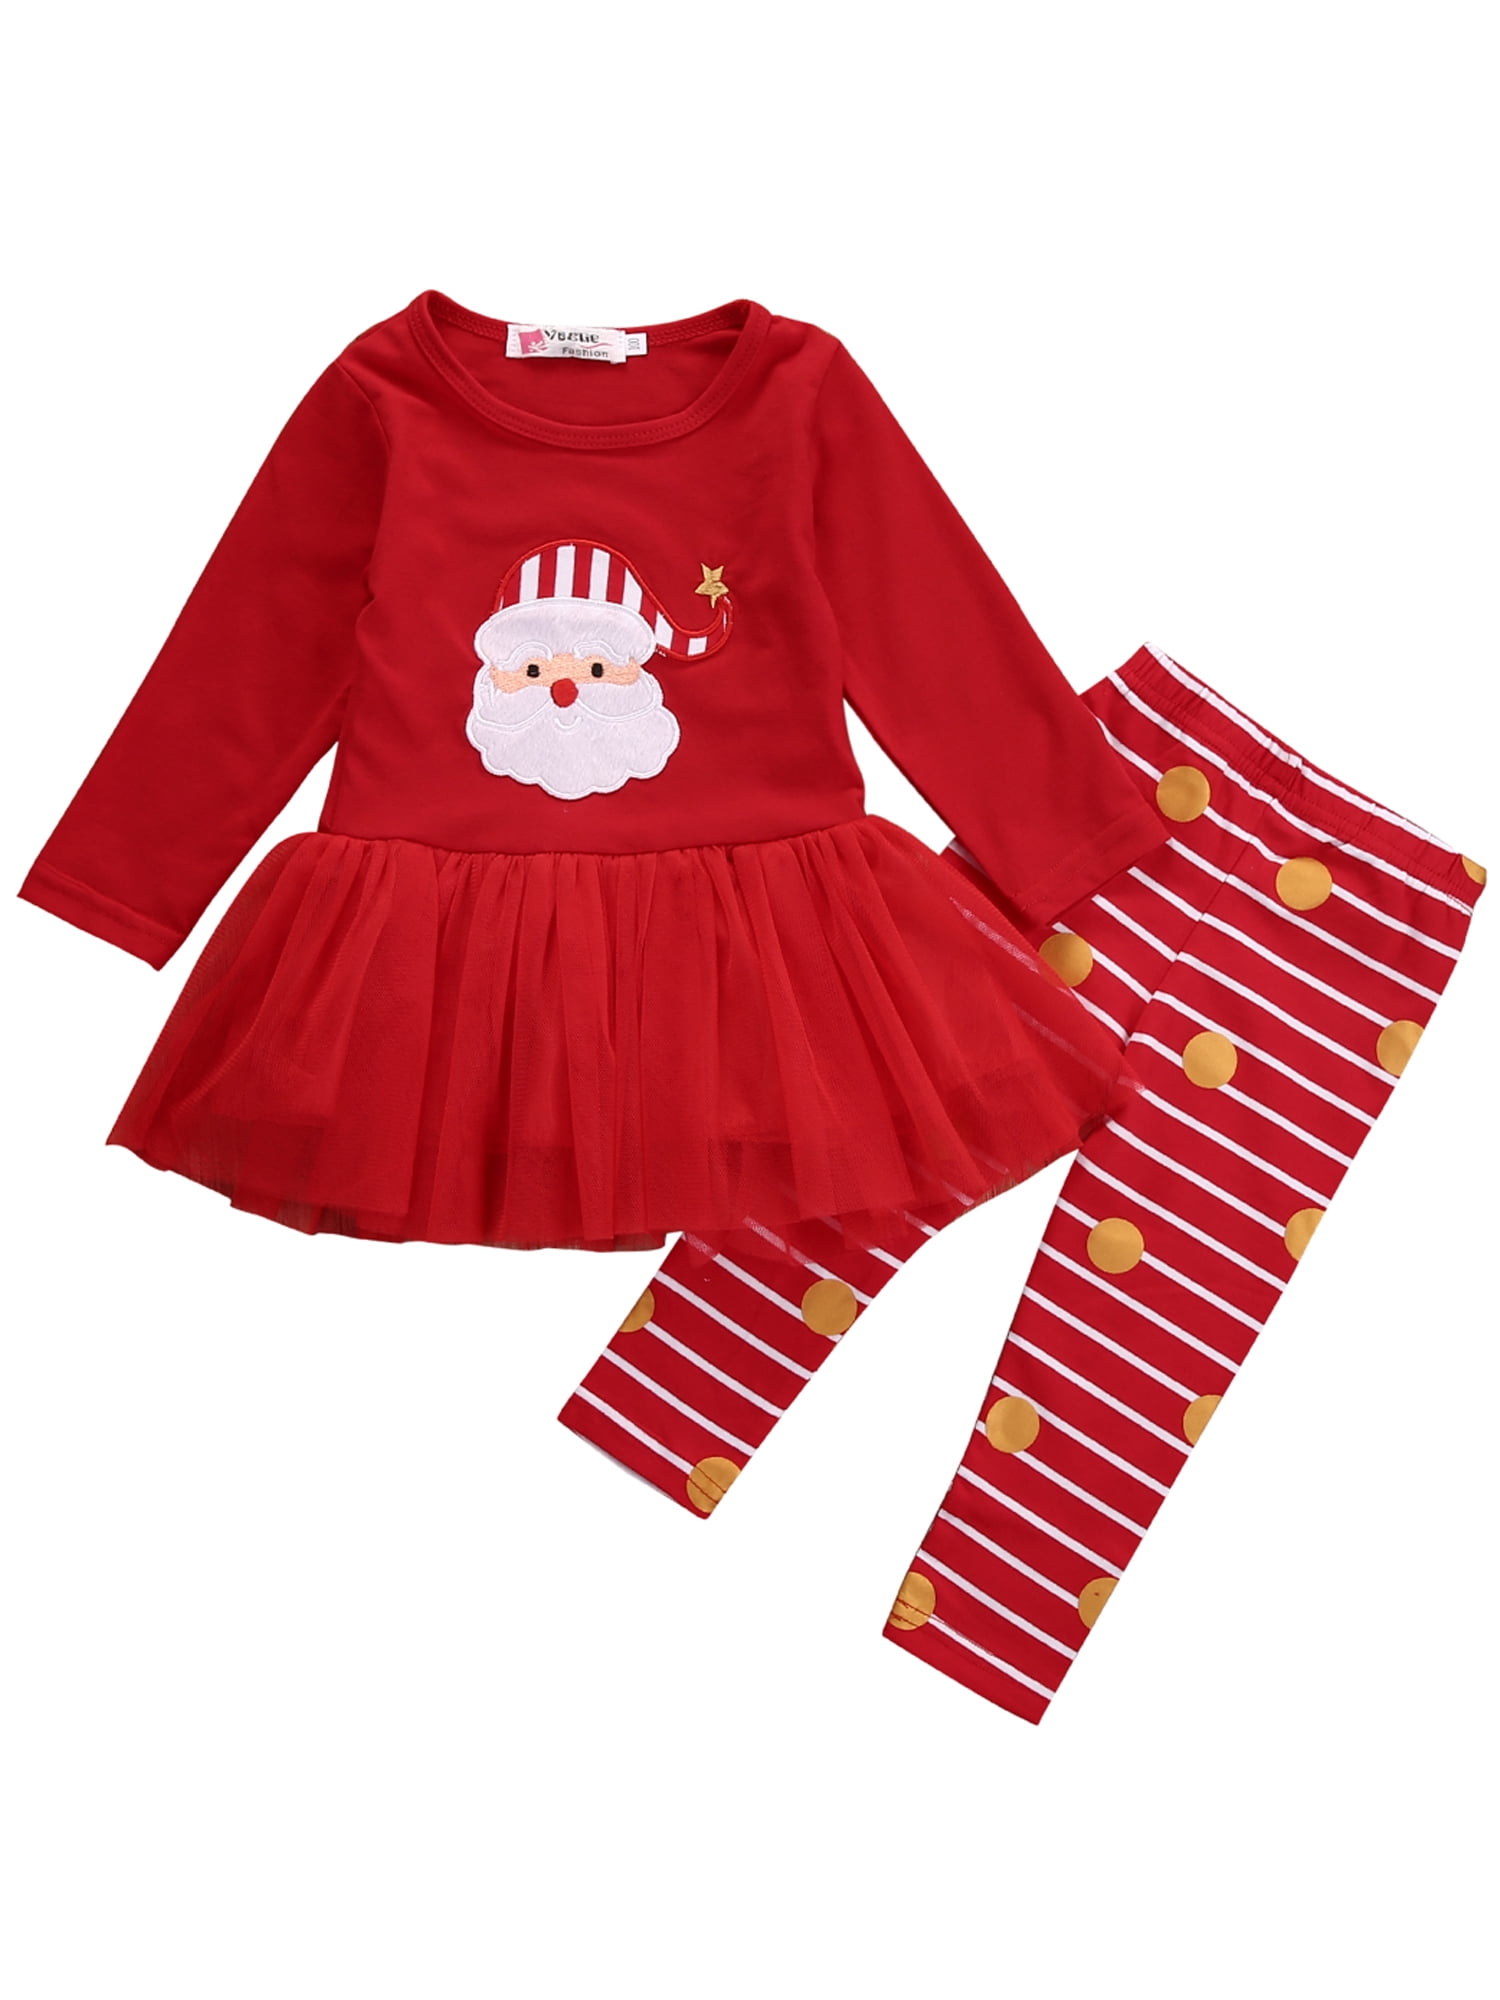 christmas outfit for 12 month old girl